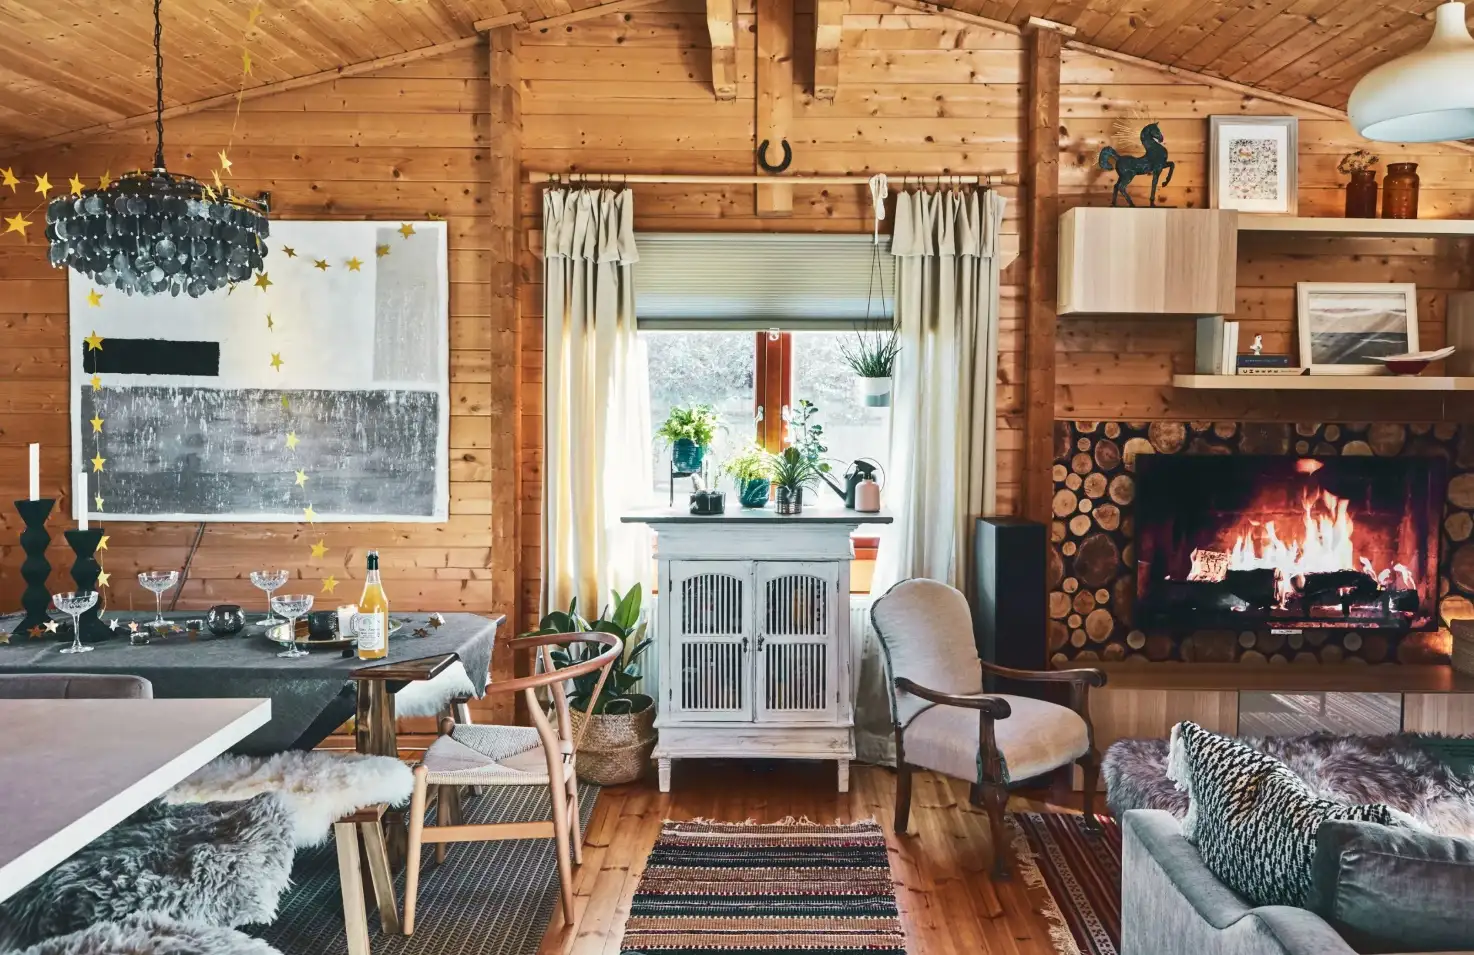 How To Decorate A Log Cabin Home